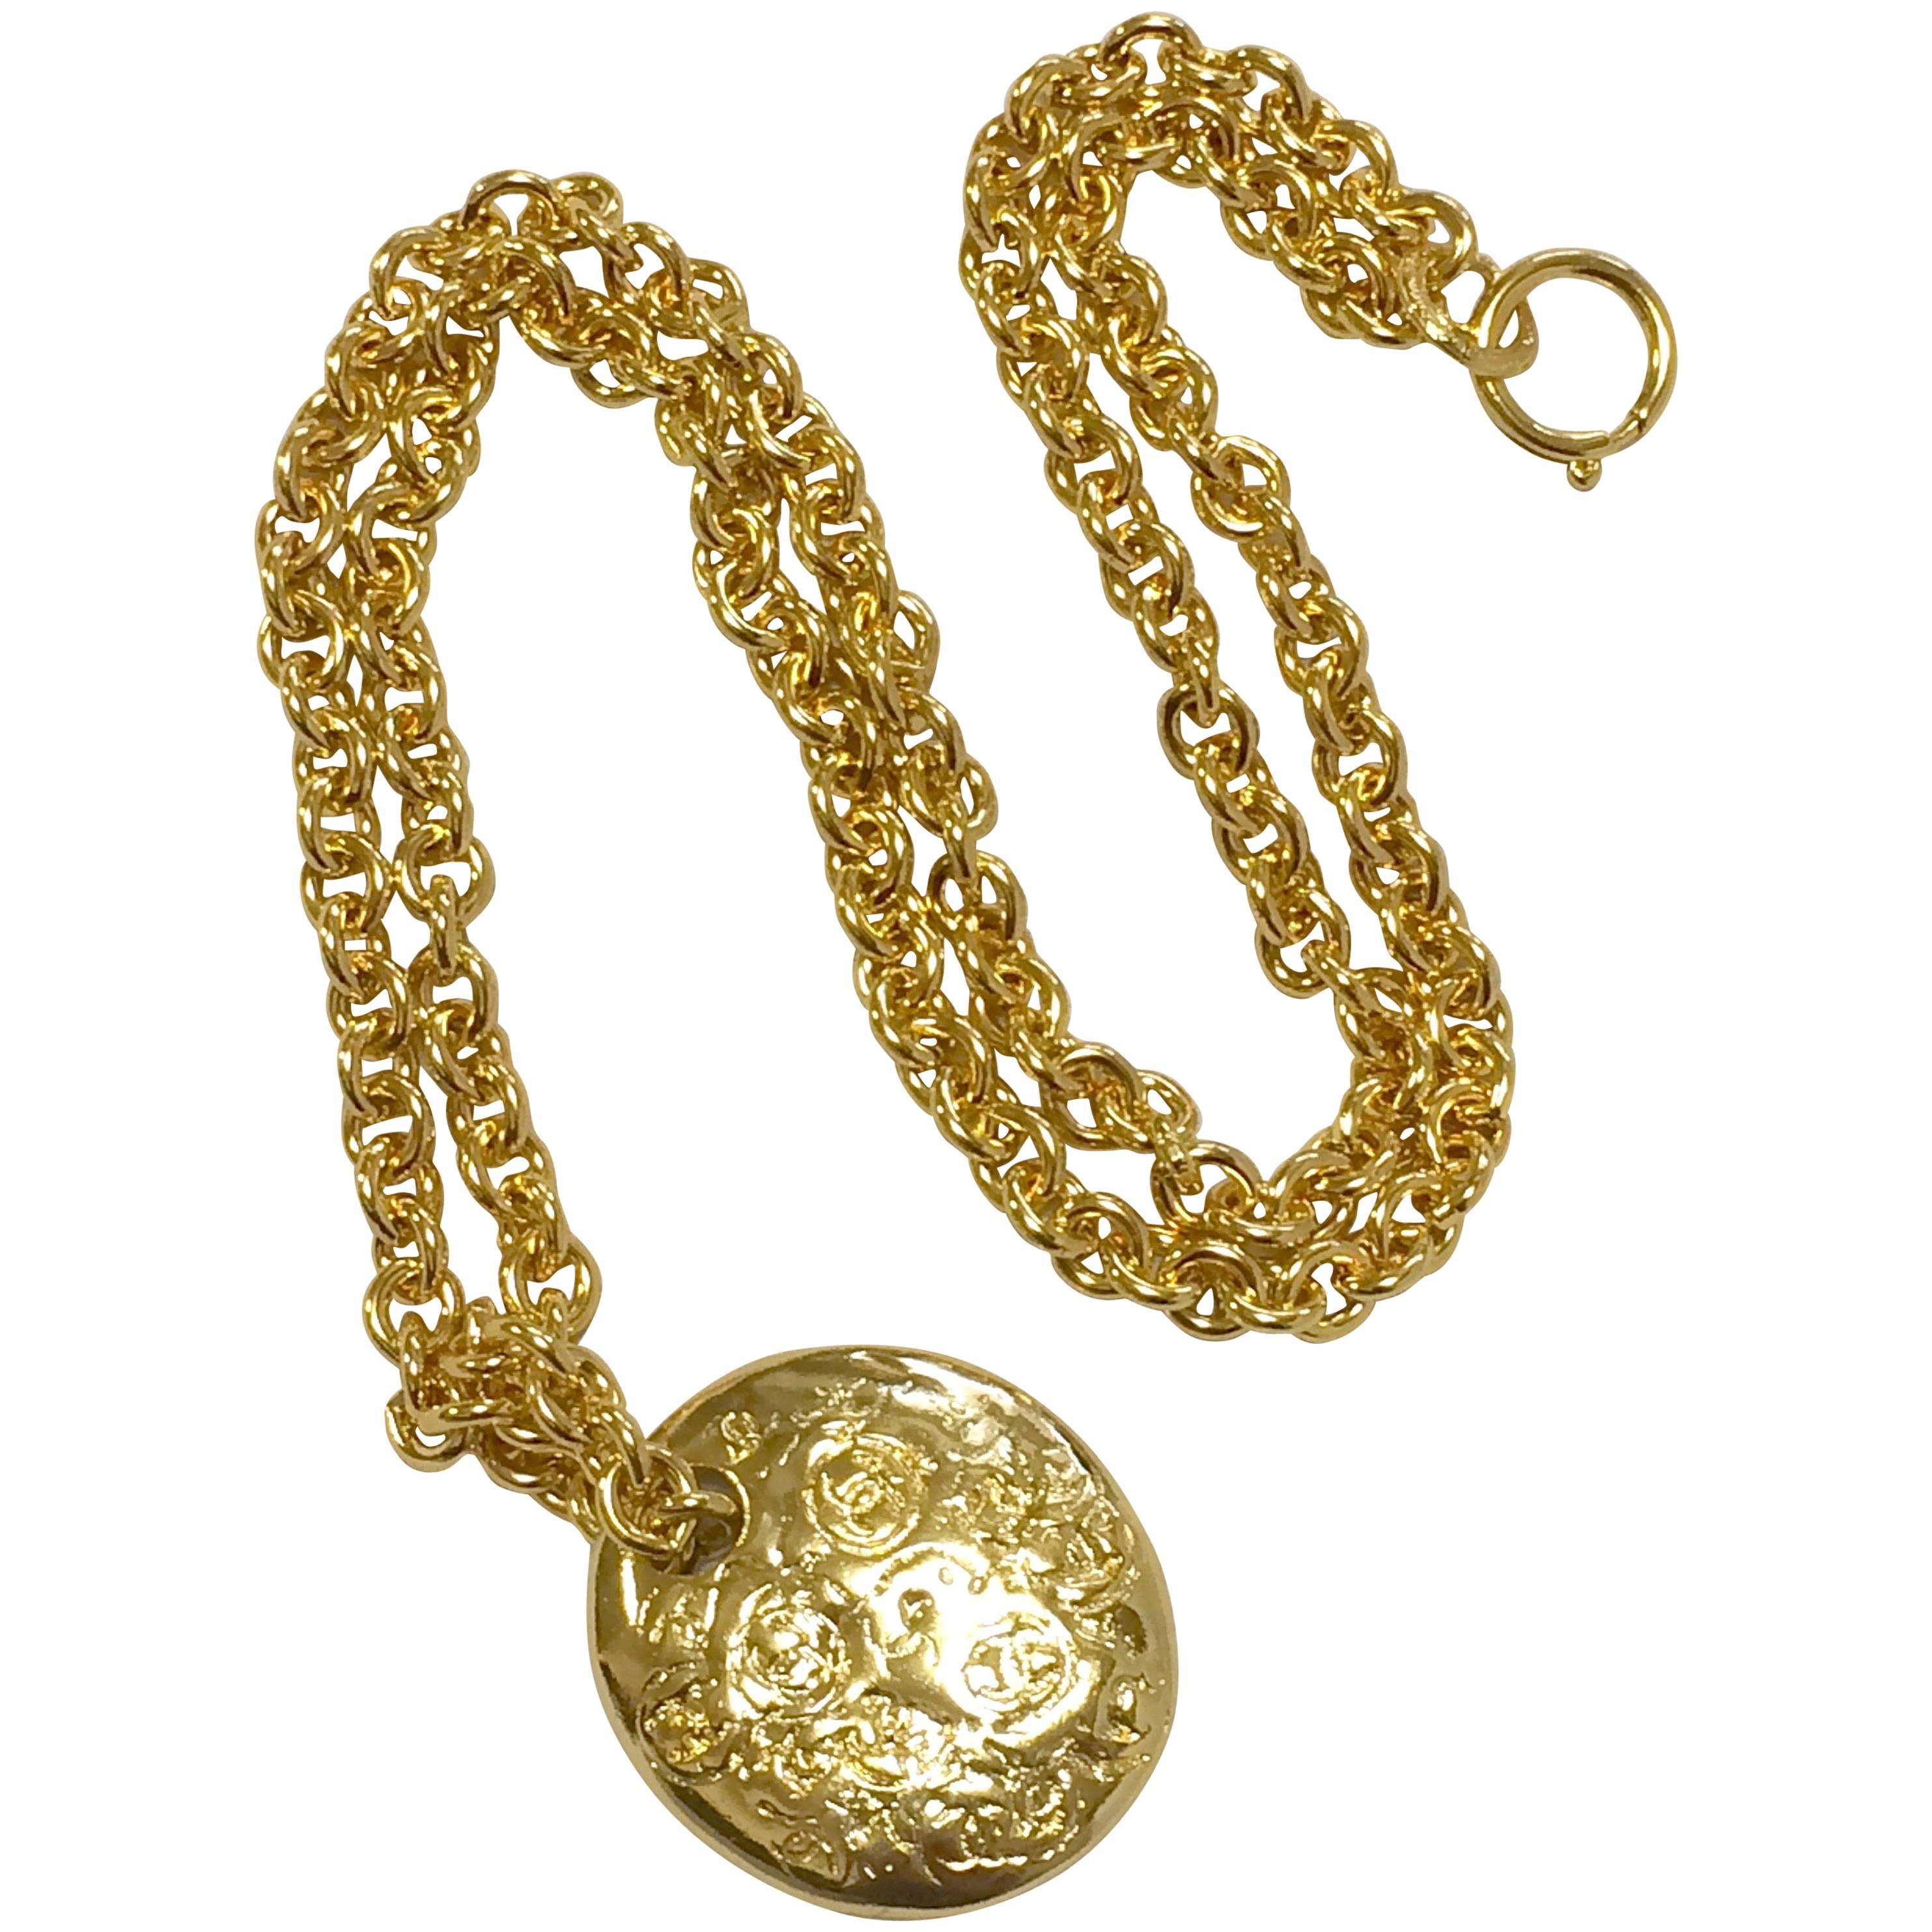 MINT. Vintage CHANEL golden long chain necklace with round coin, medal shape top